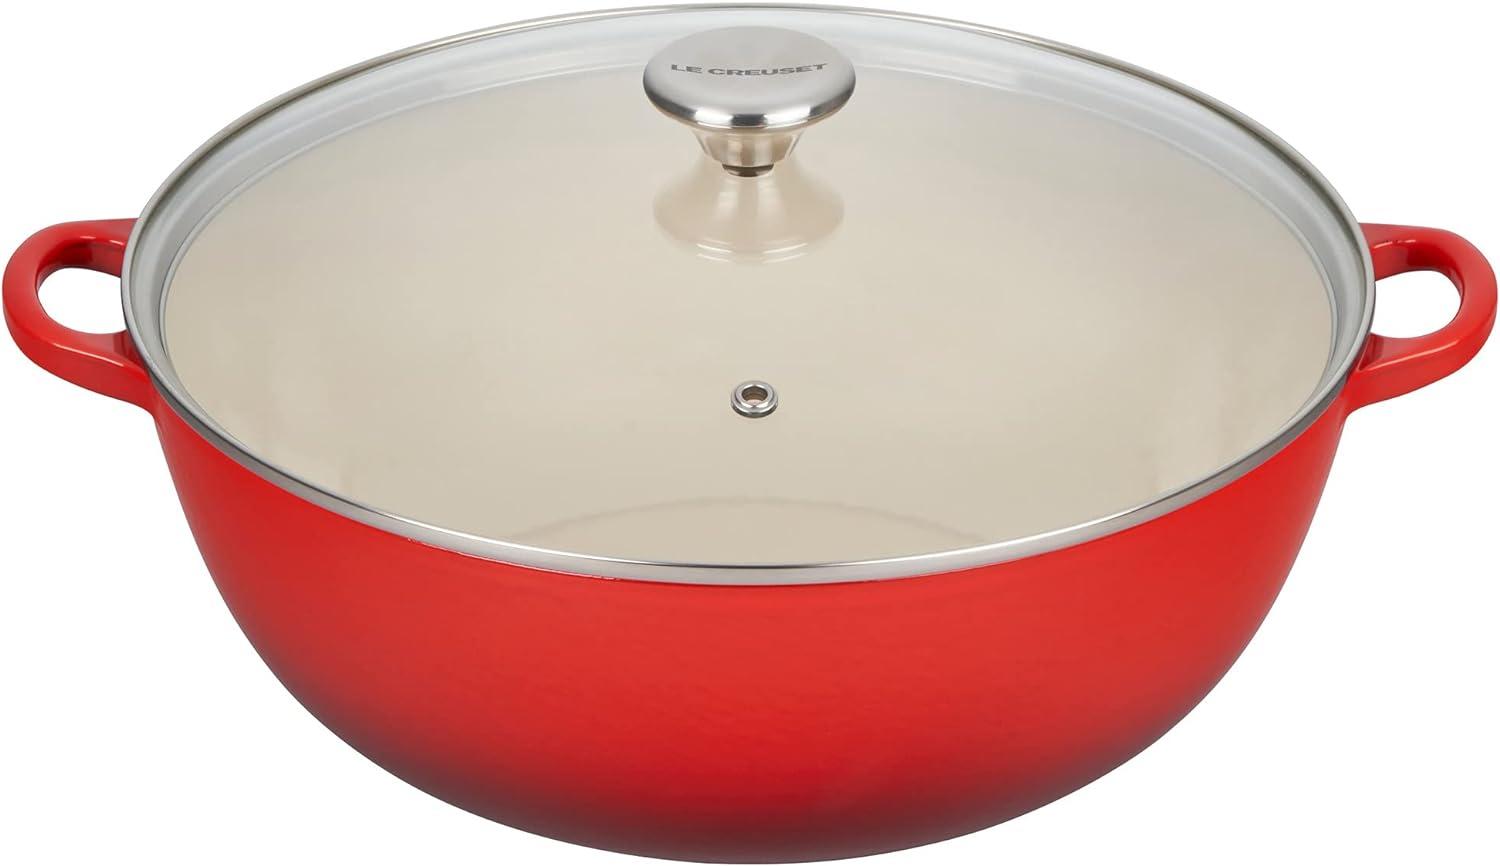 Le Creuset Enameled Cast Iron Chefs Oven for $176 Shipped